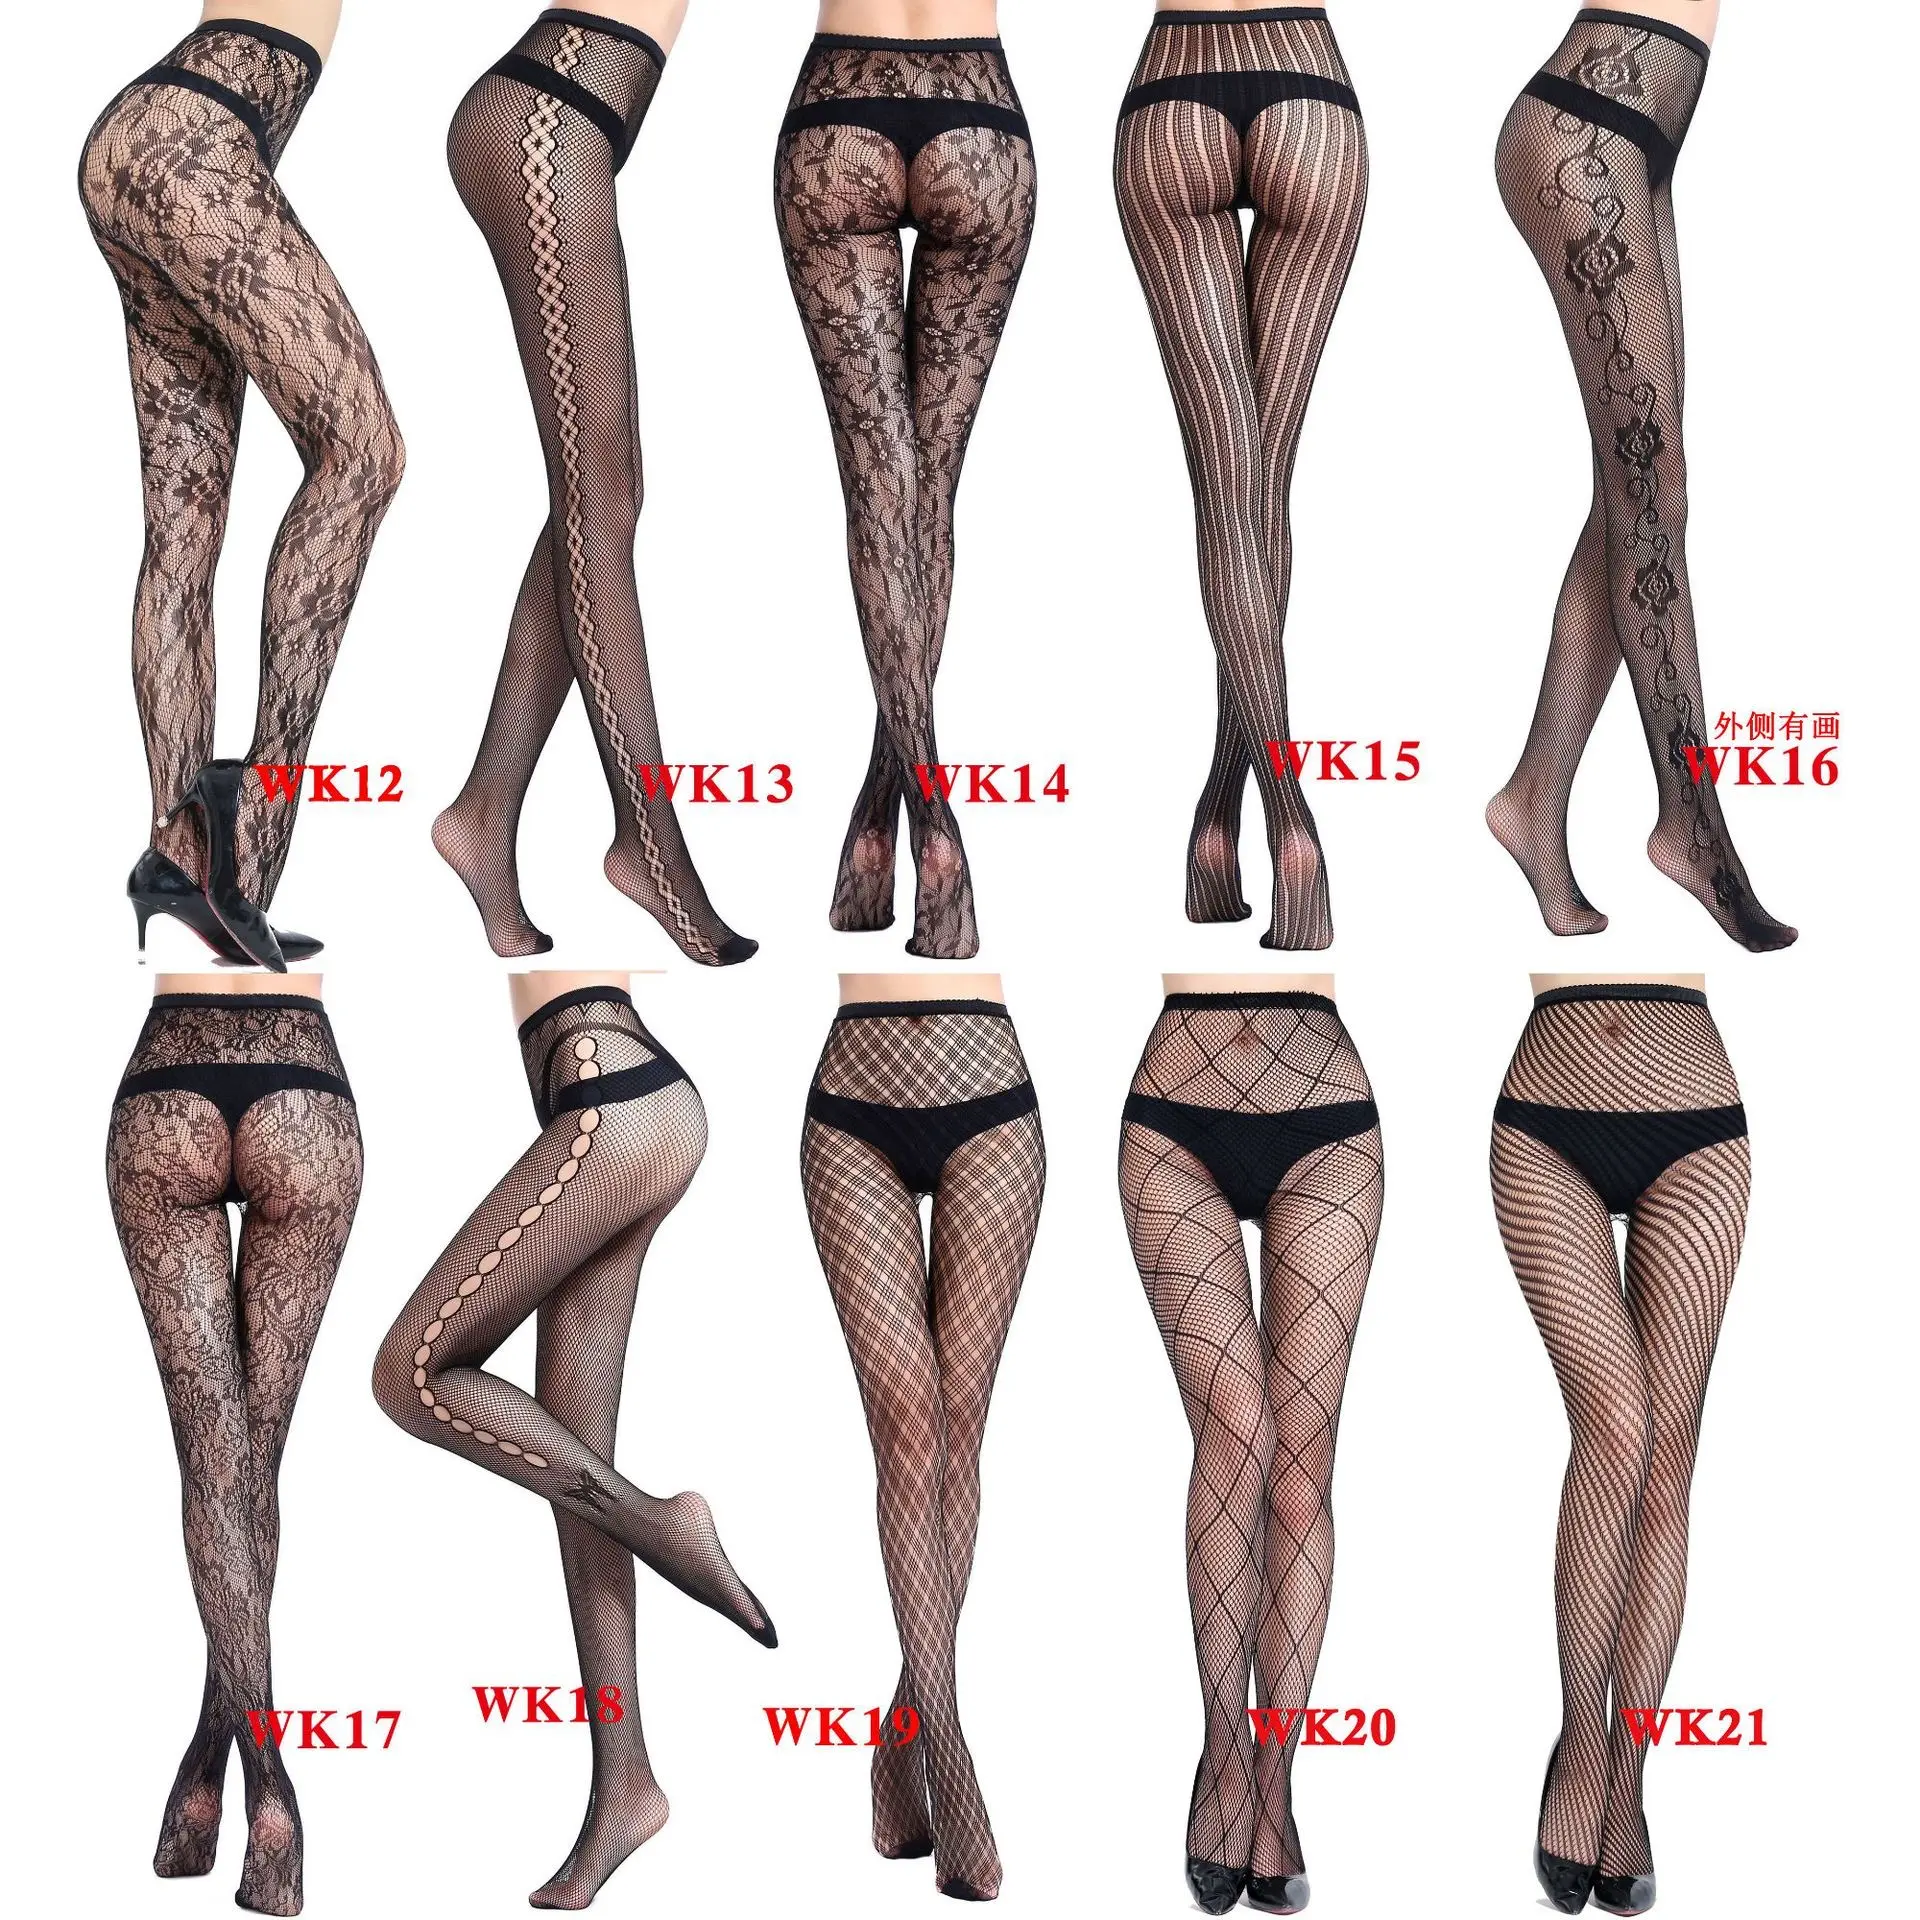 New Popular Fashion Black Floral Lace Transparent Sexy Lace Stockings Pantyhose Tights